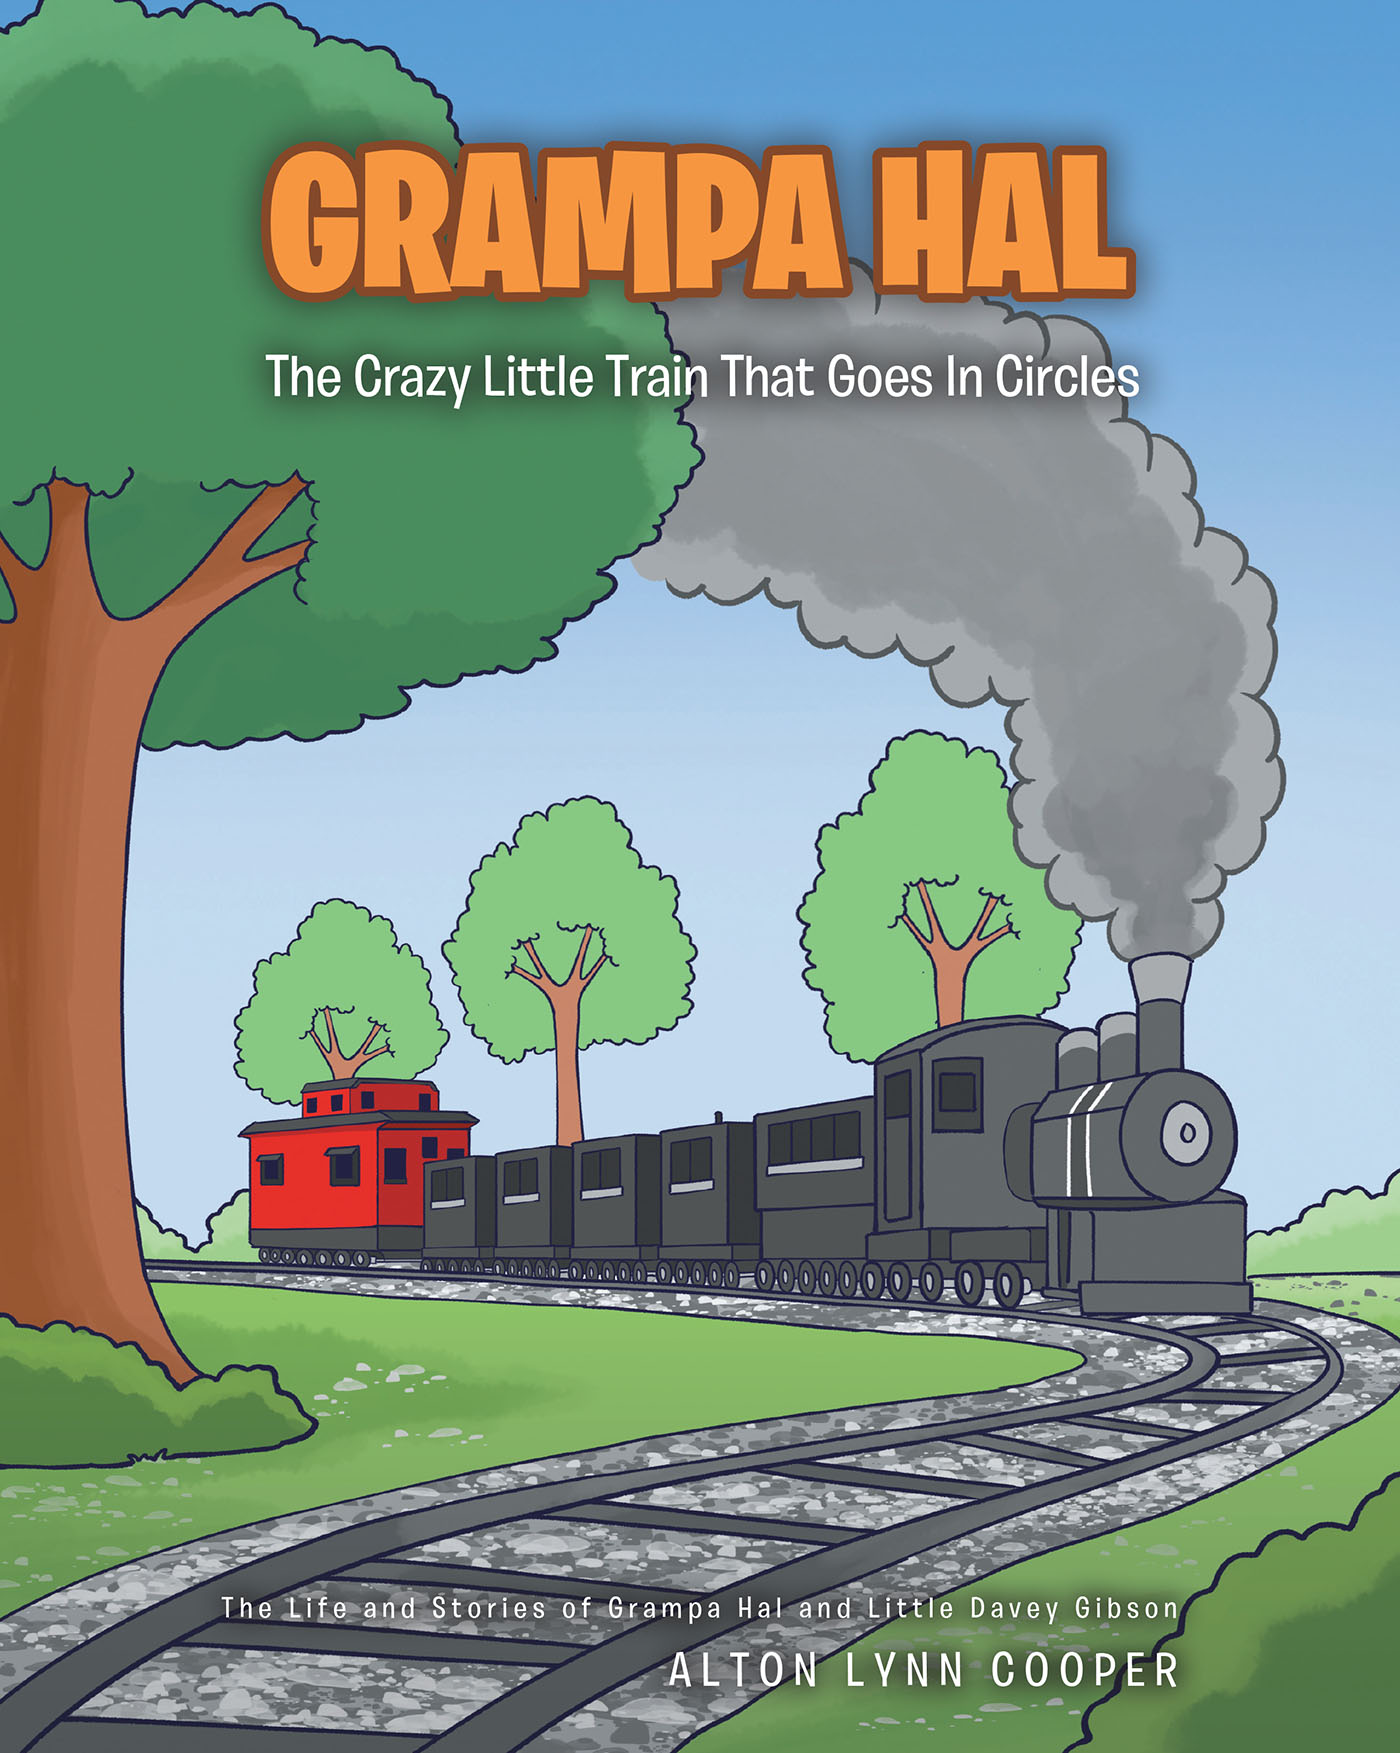 Alton Lynn Cooper’s Newly Released “Grampa Hal The Crazy Little Train That Goes In Circles” is a Sweet Tale That Celebrates God’s Gift of Creativity